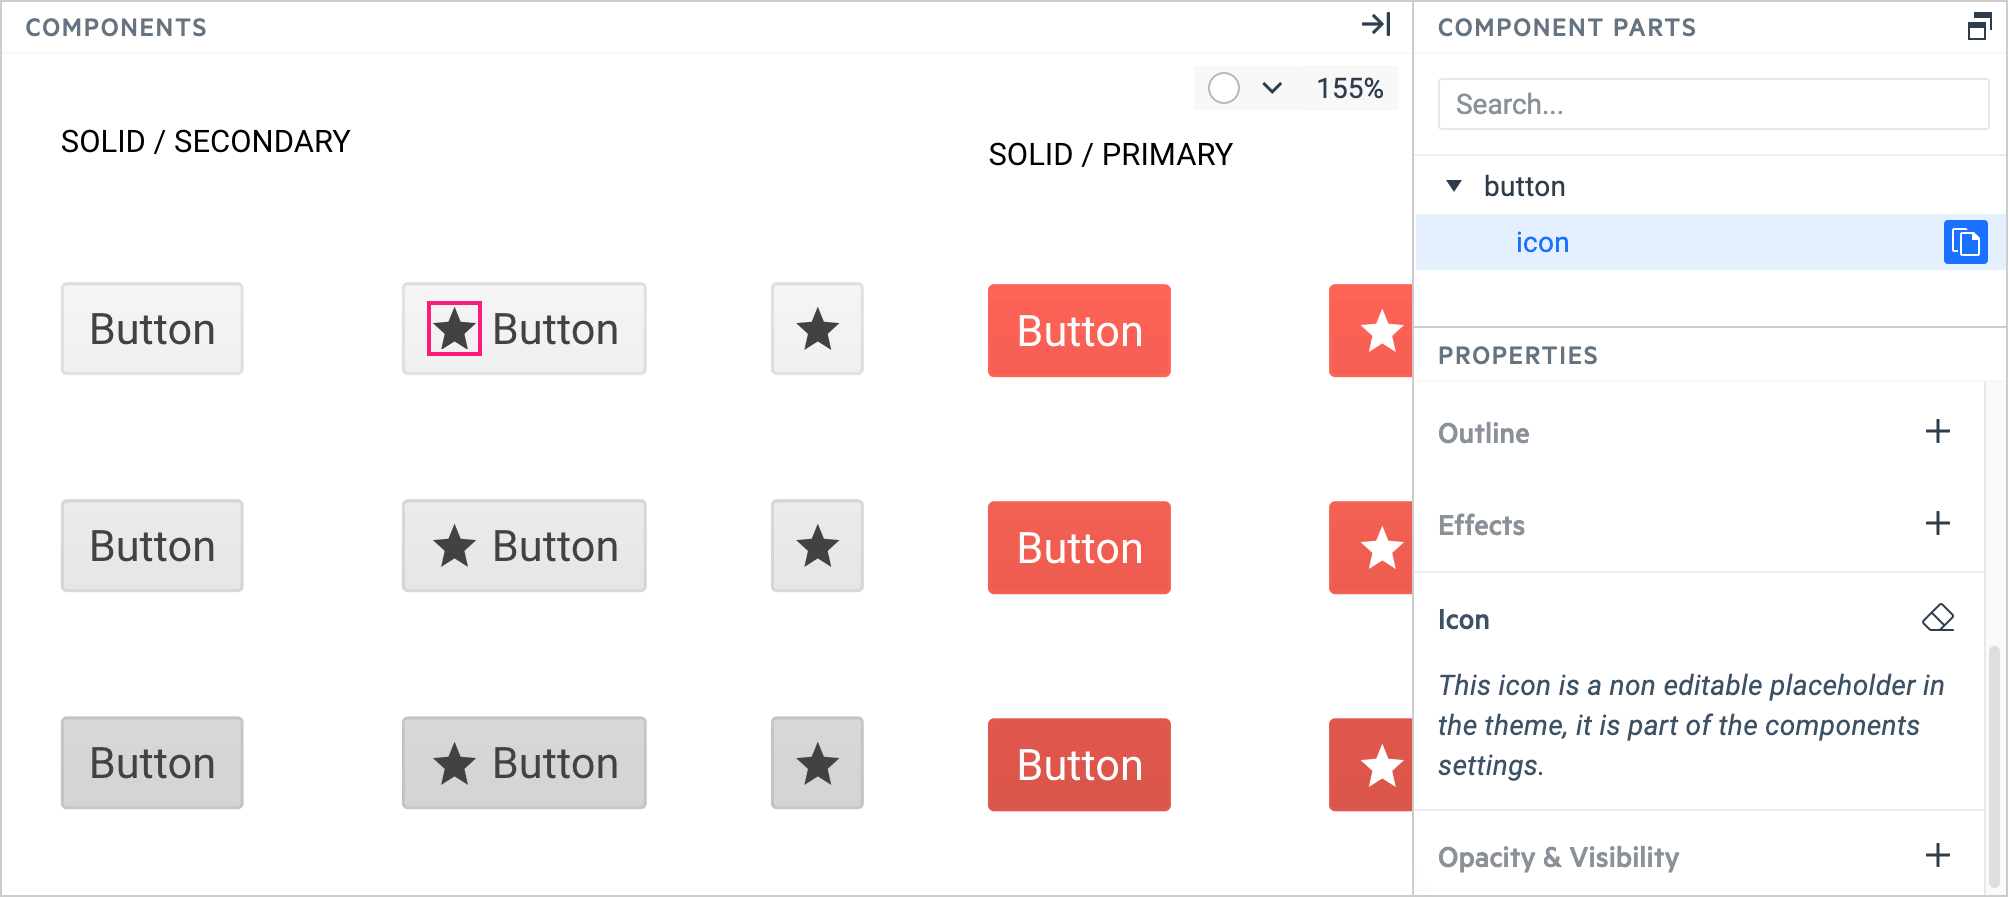 A Button with an icon as placeholder